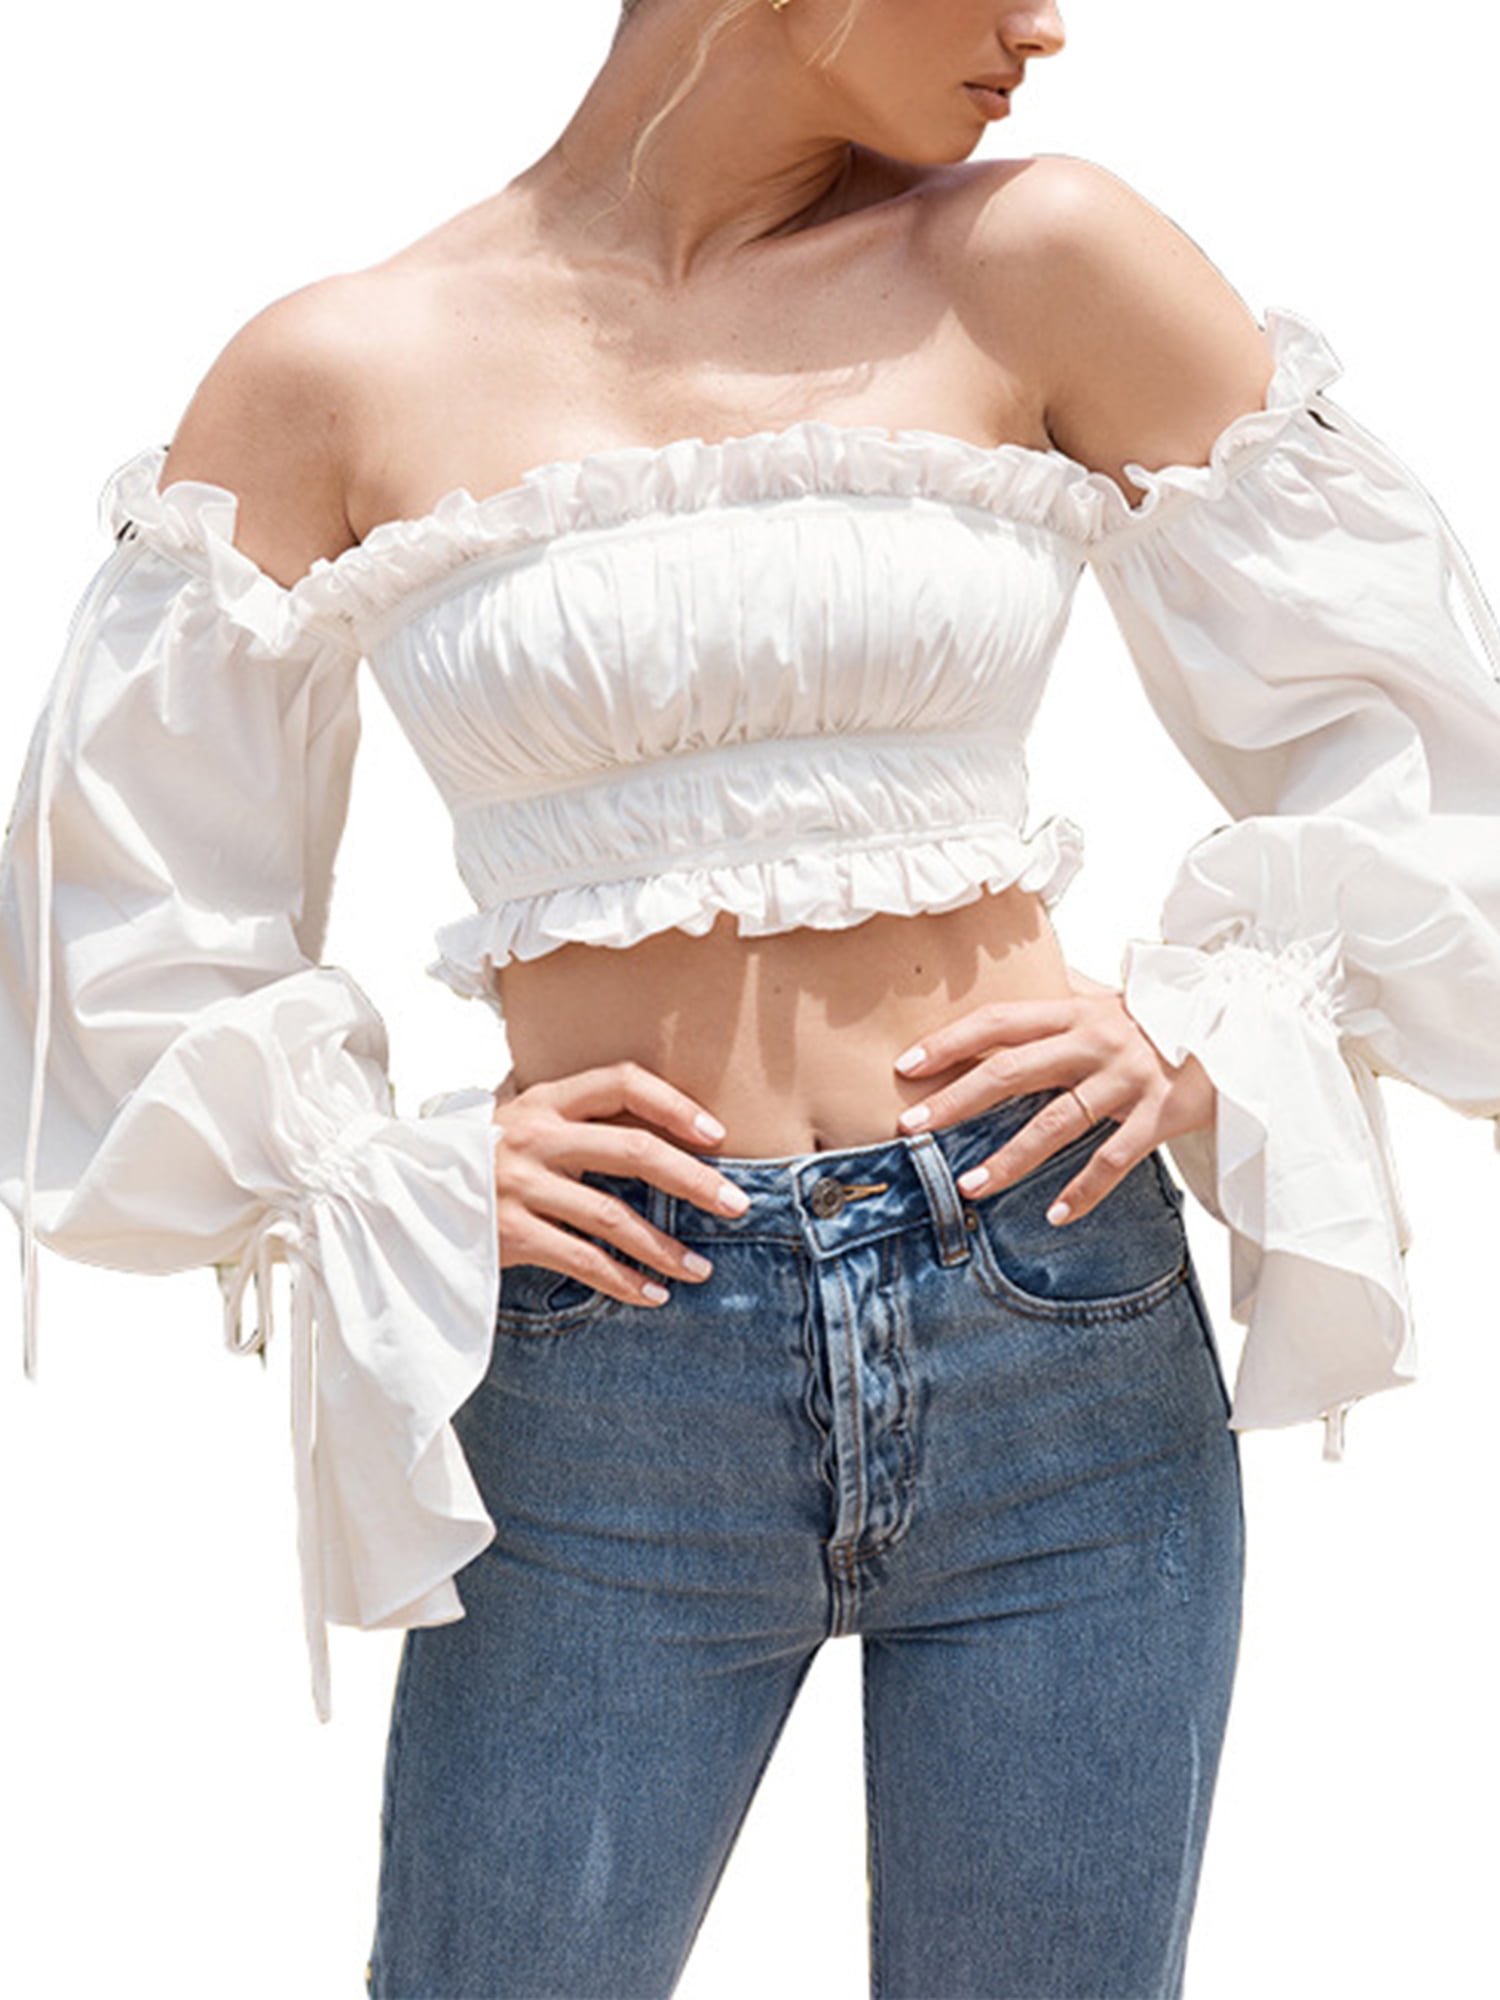 ZhenYiShi Women Summer Short Sleeve Strappy Cold Shoulder Tops Blouses 